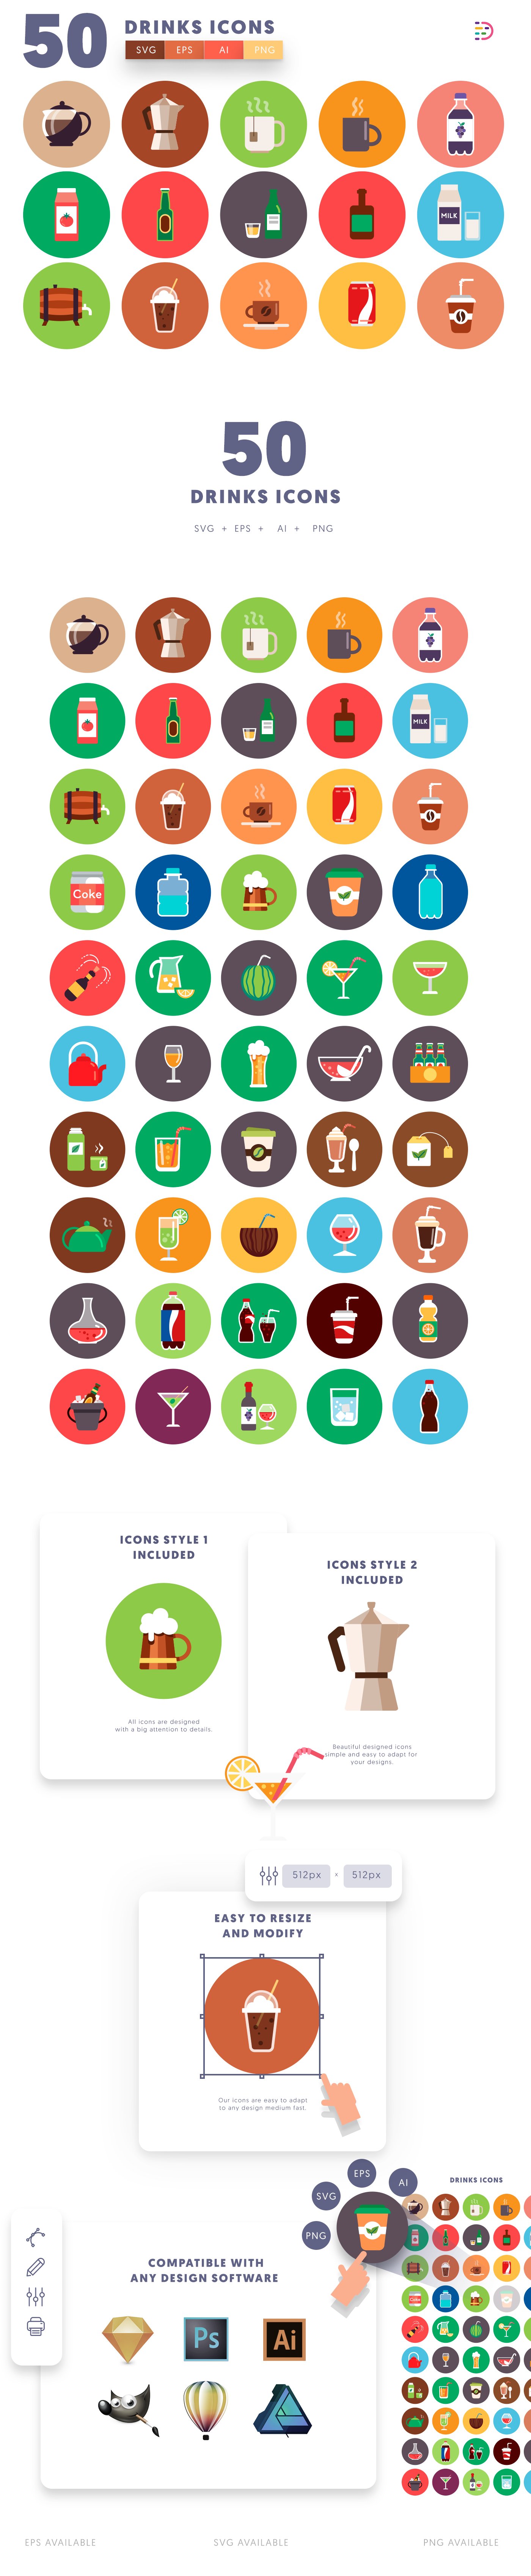 50 Drinks Icons cover image.